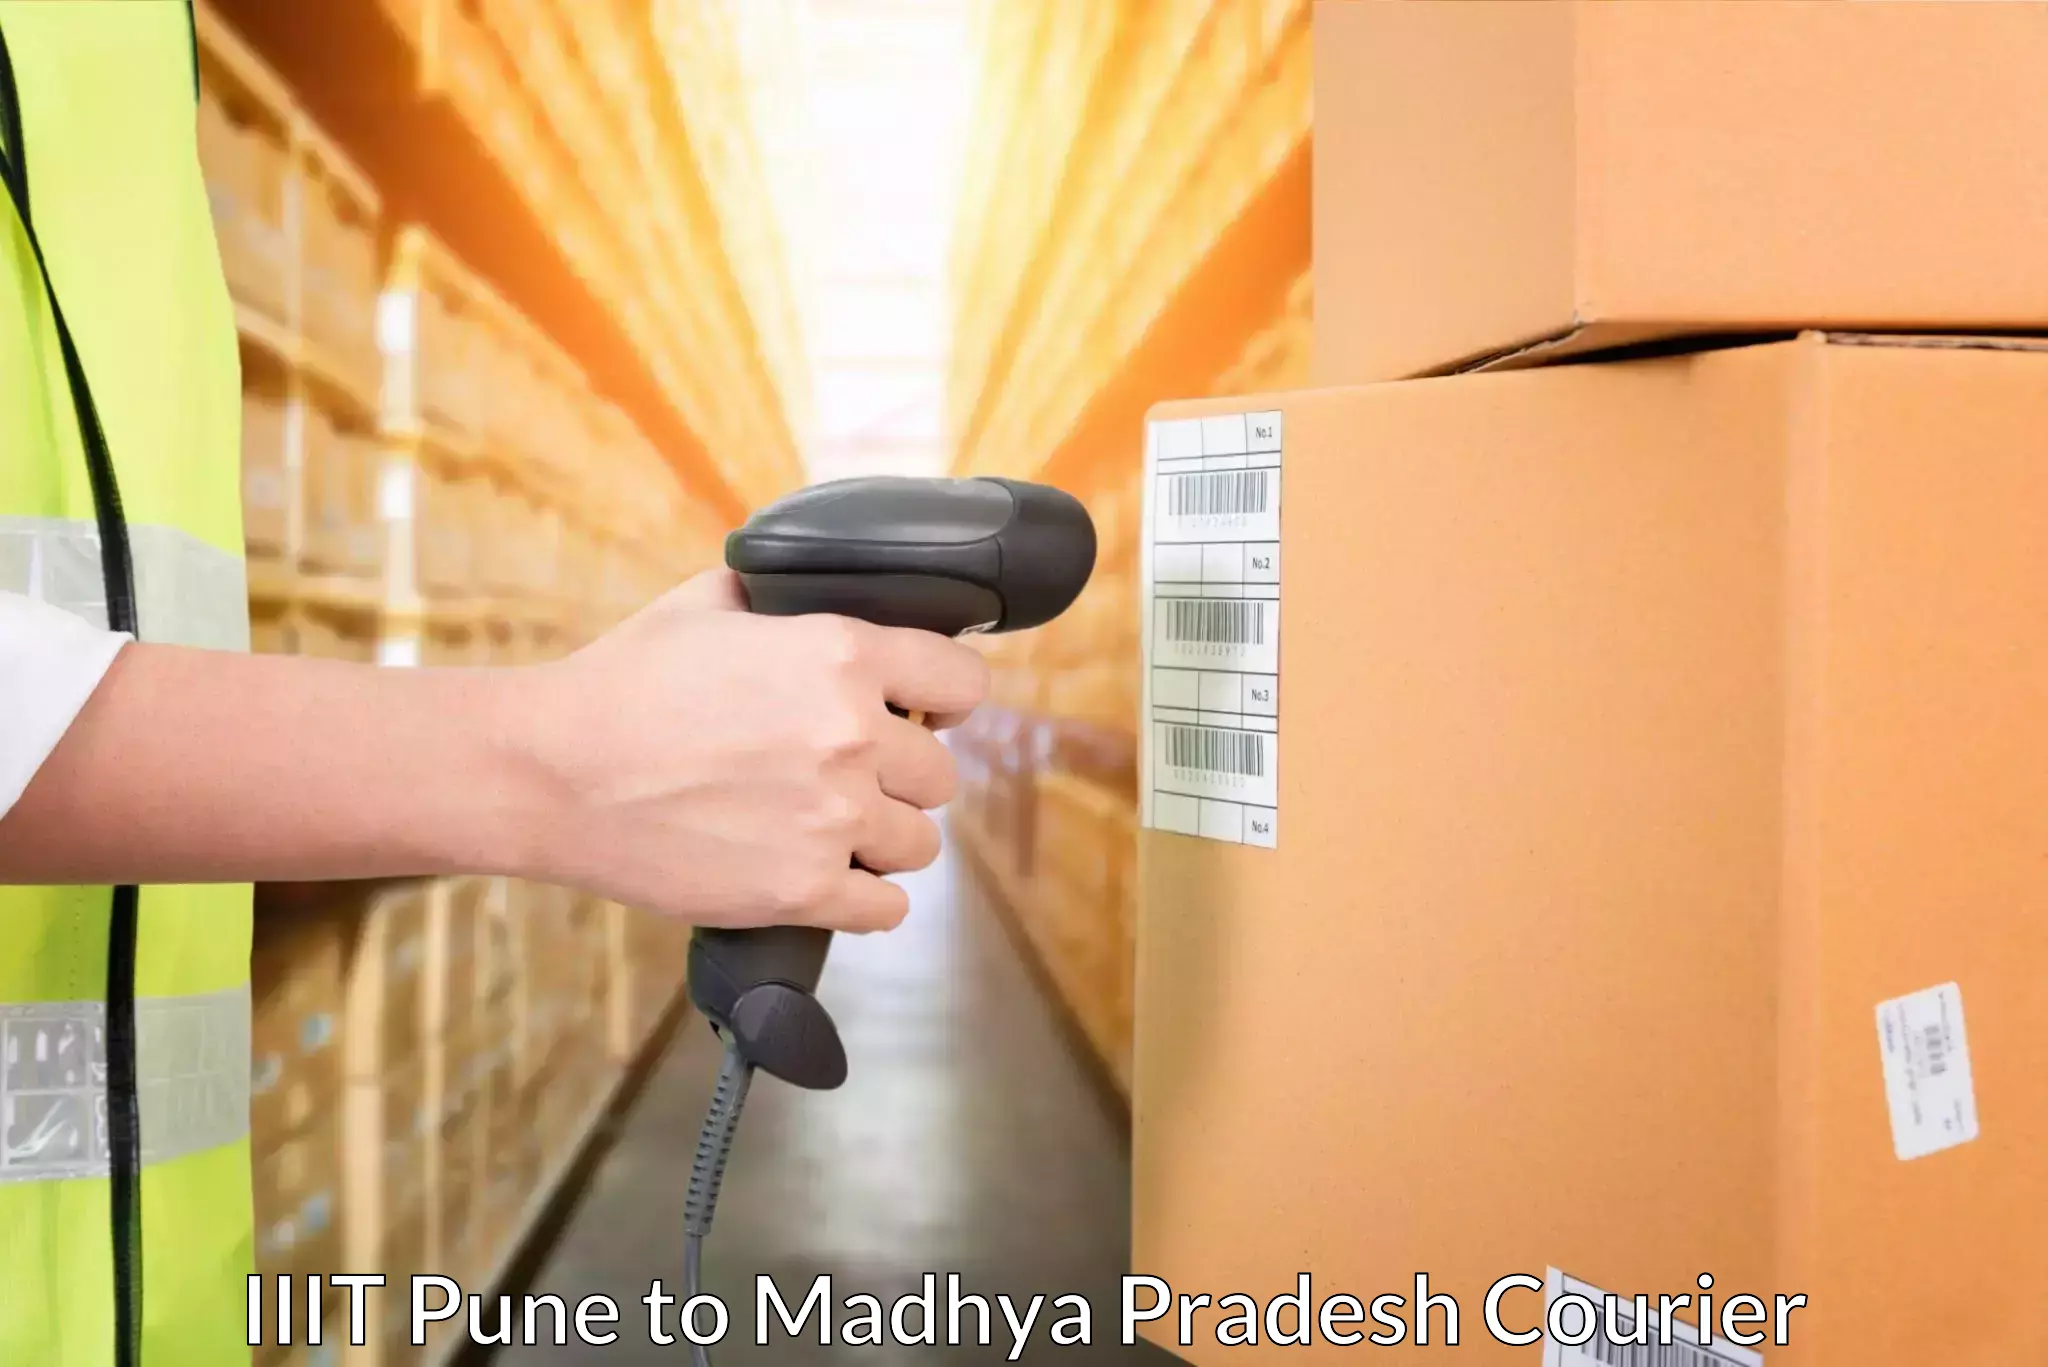 Multi-carrier shipping IIIT Pune to Depalpur